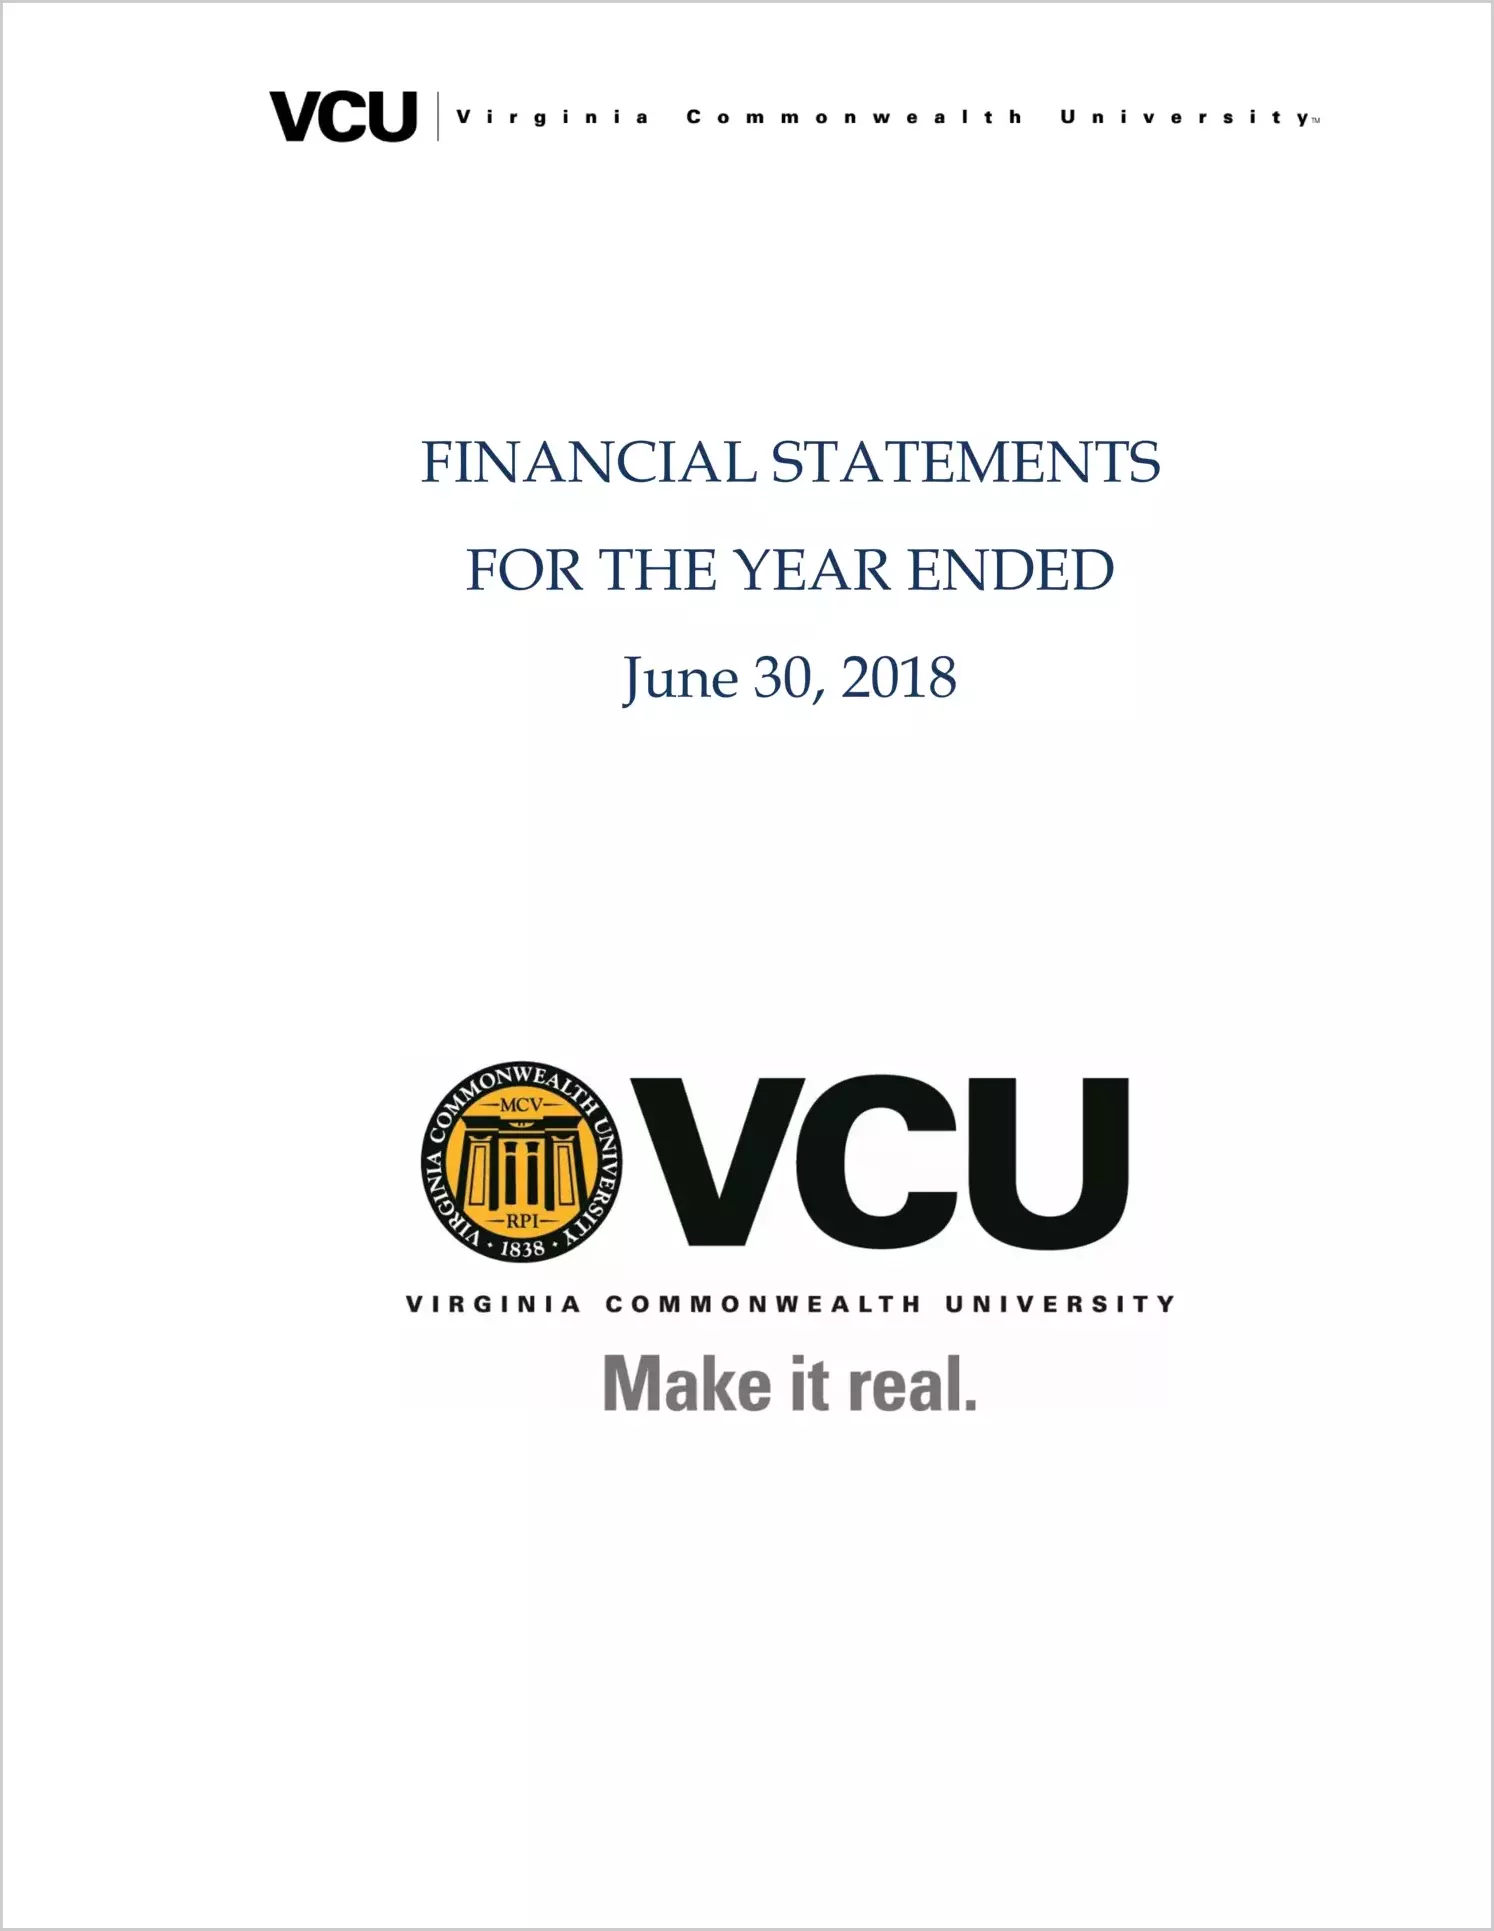 Virginia Commonwealth University Financial Statements for the year ended June 30, 2018